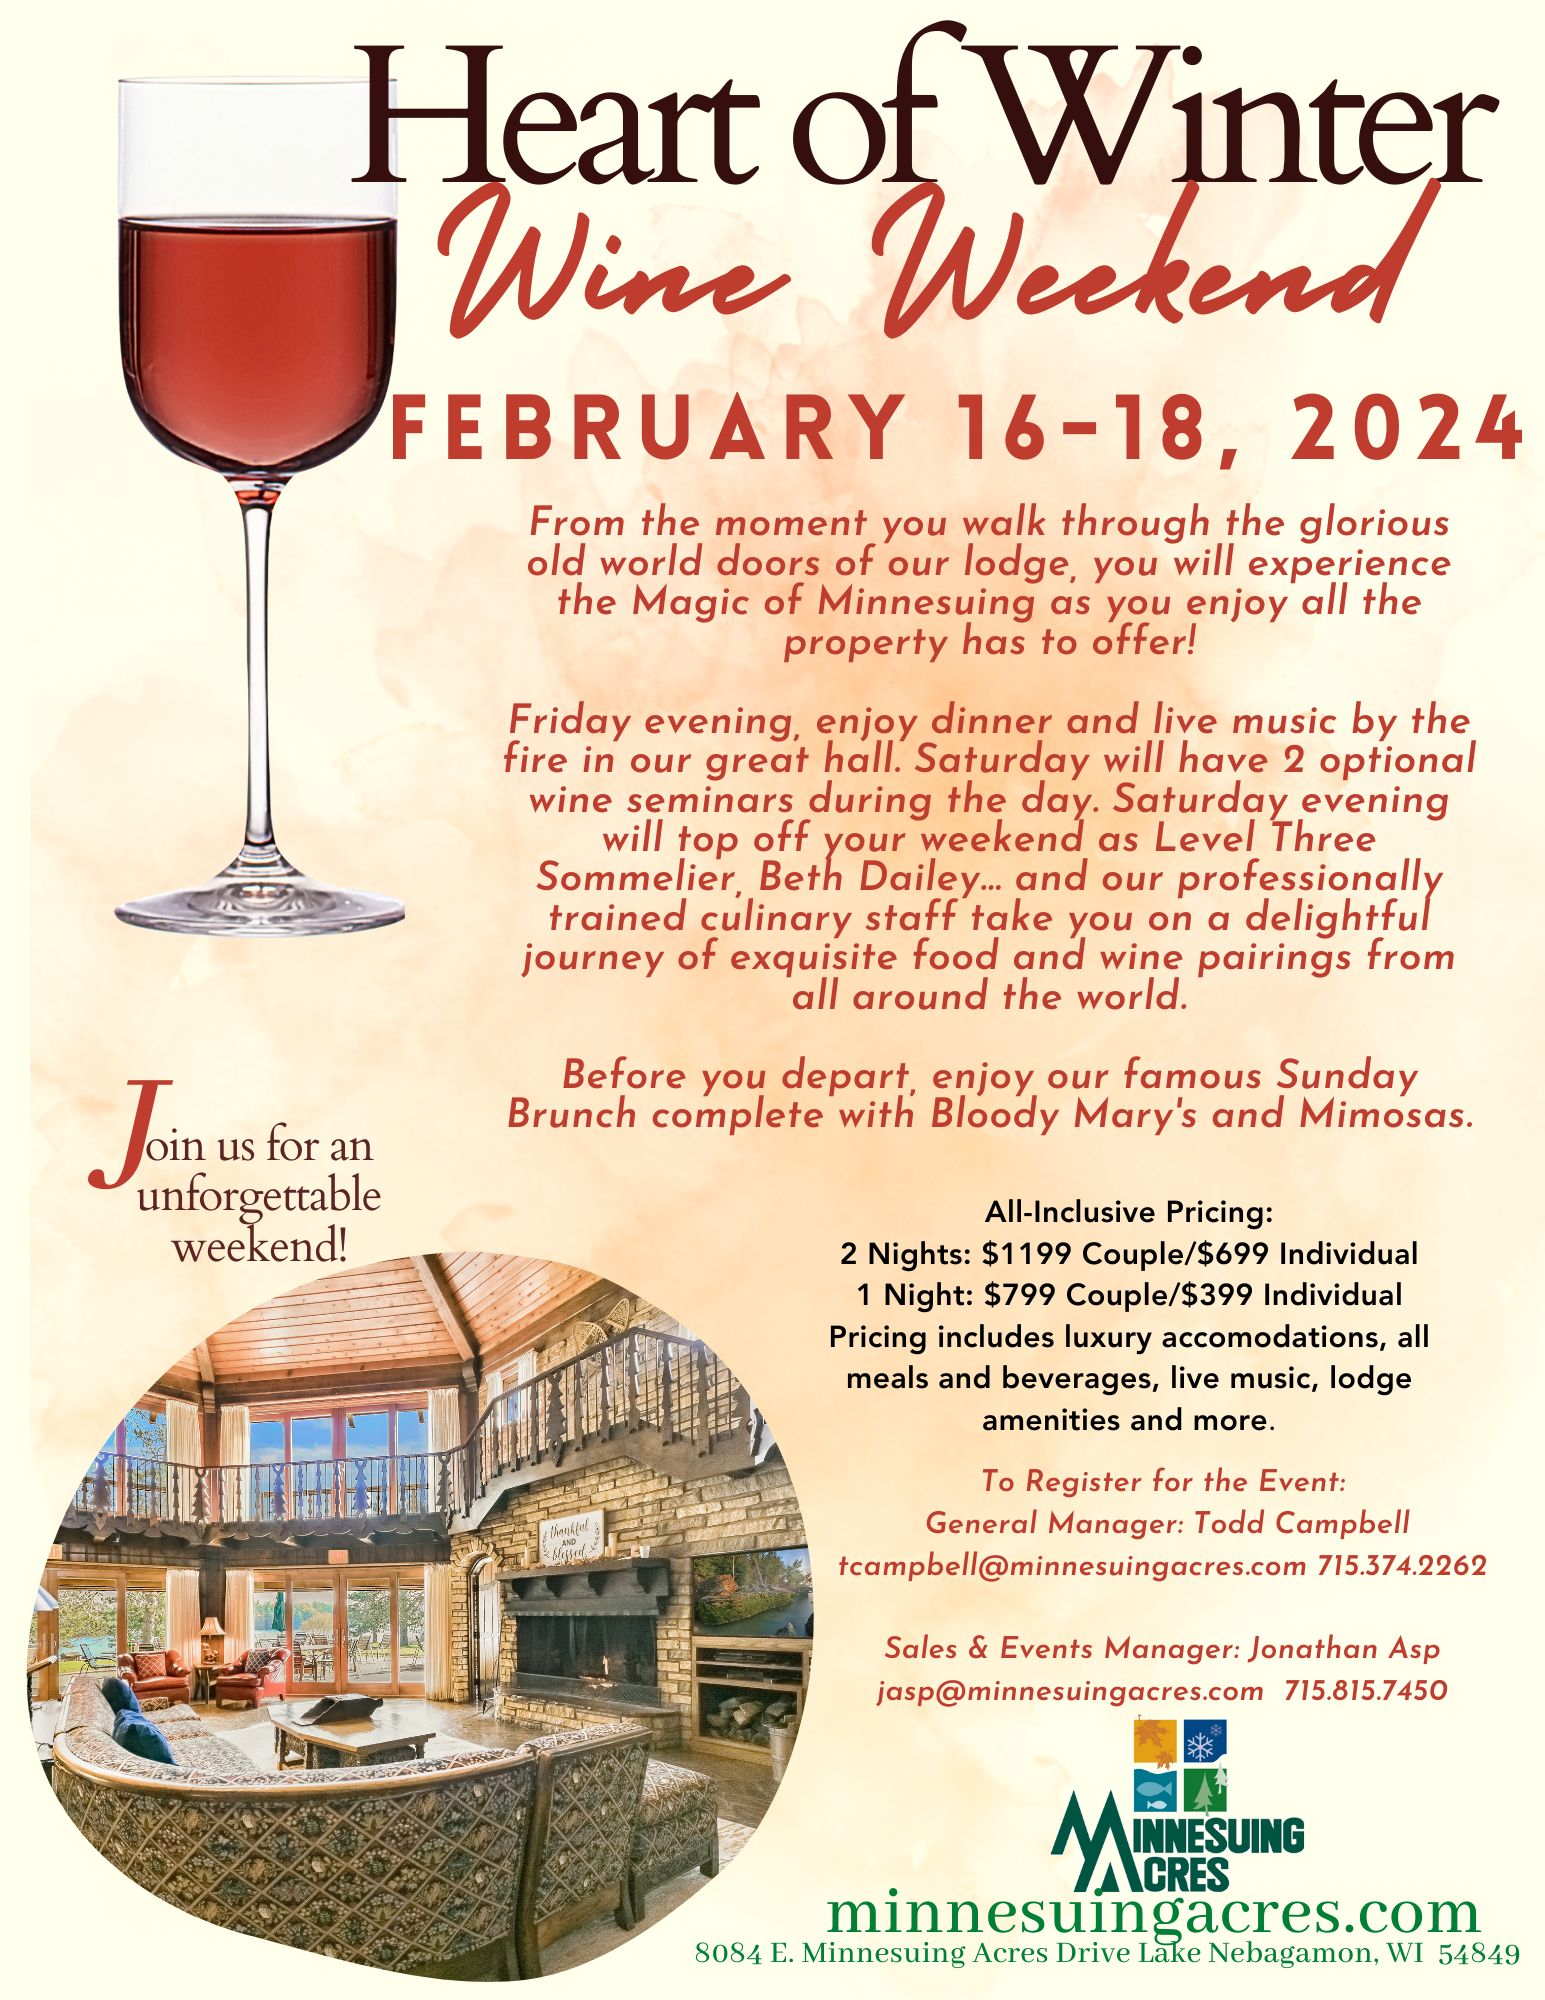 HEART OF WINTER WINE WEEKEND 2024 WITH PRICING 20240119 104746 0000